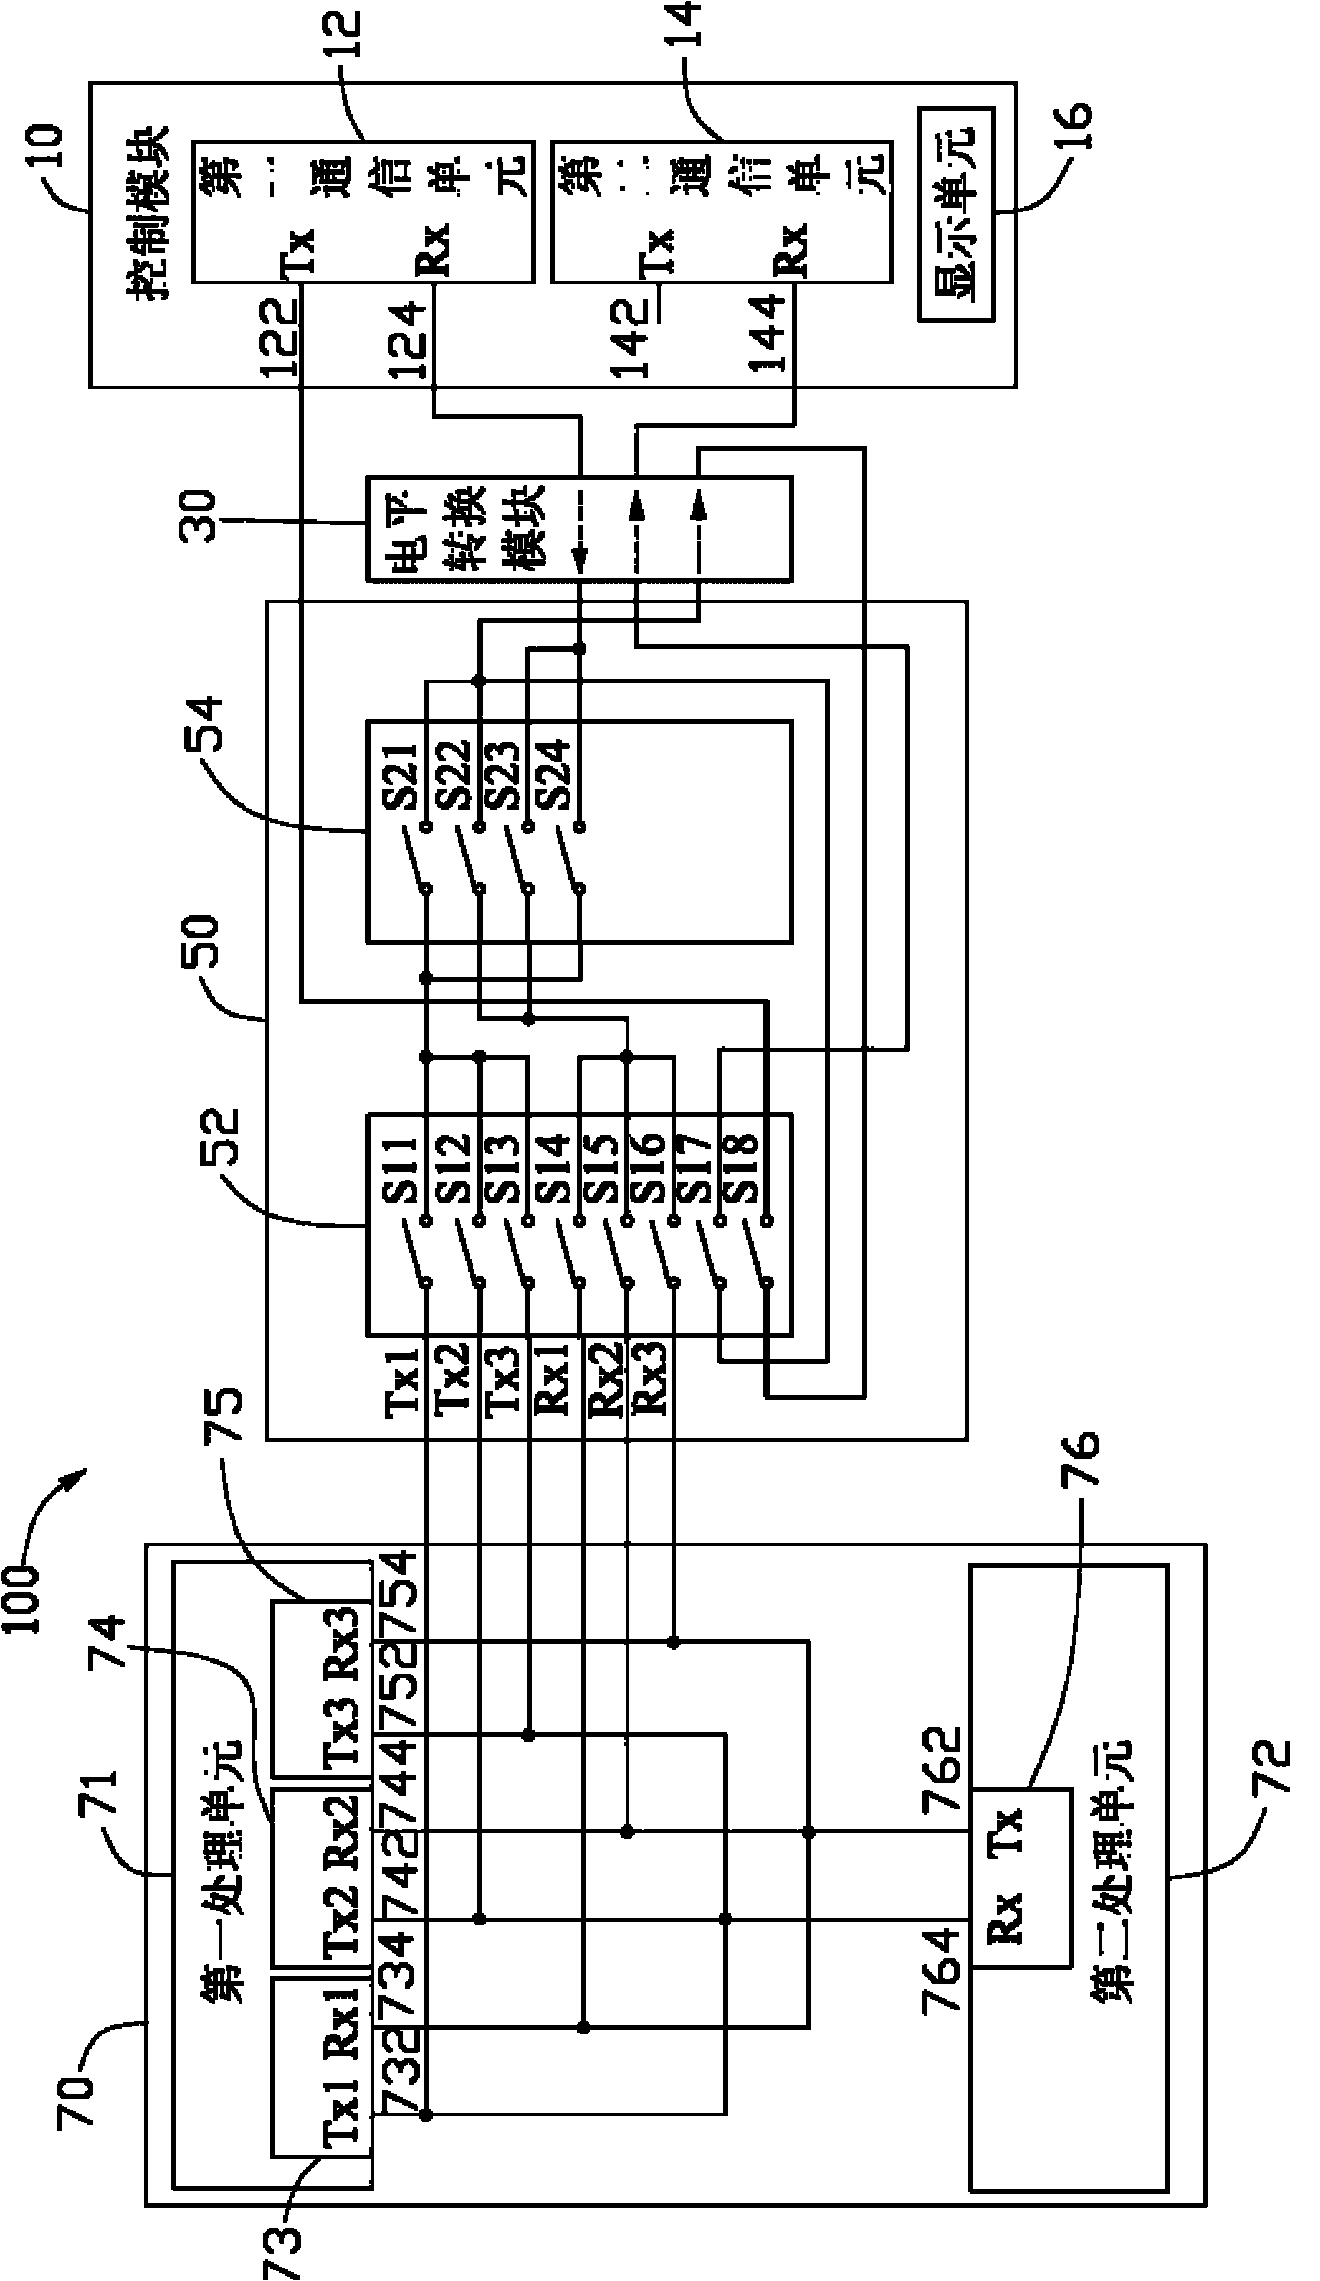 Serial interface communication testing system